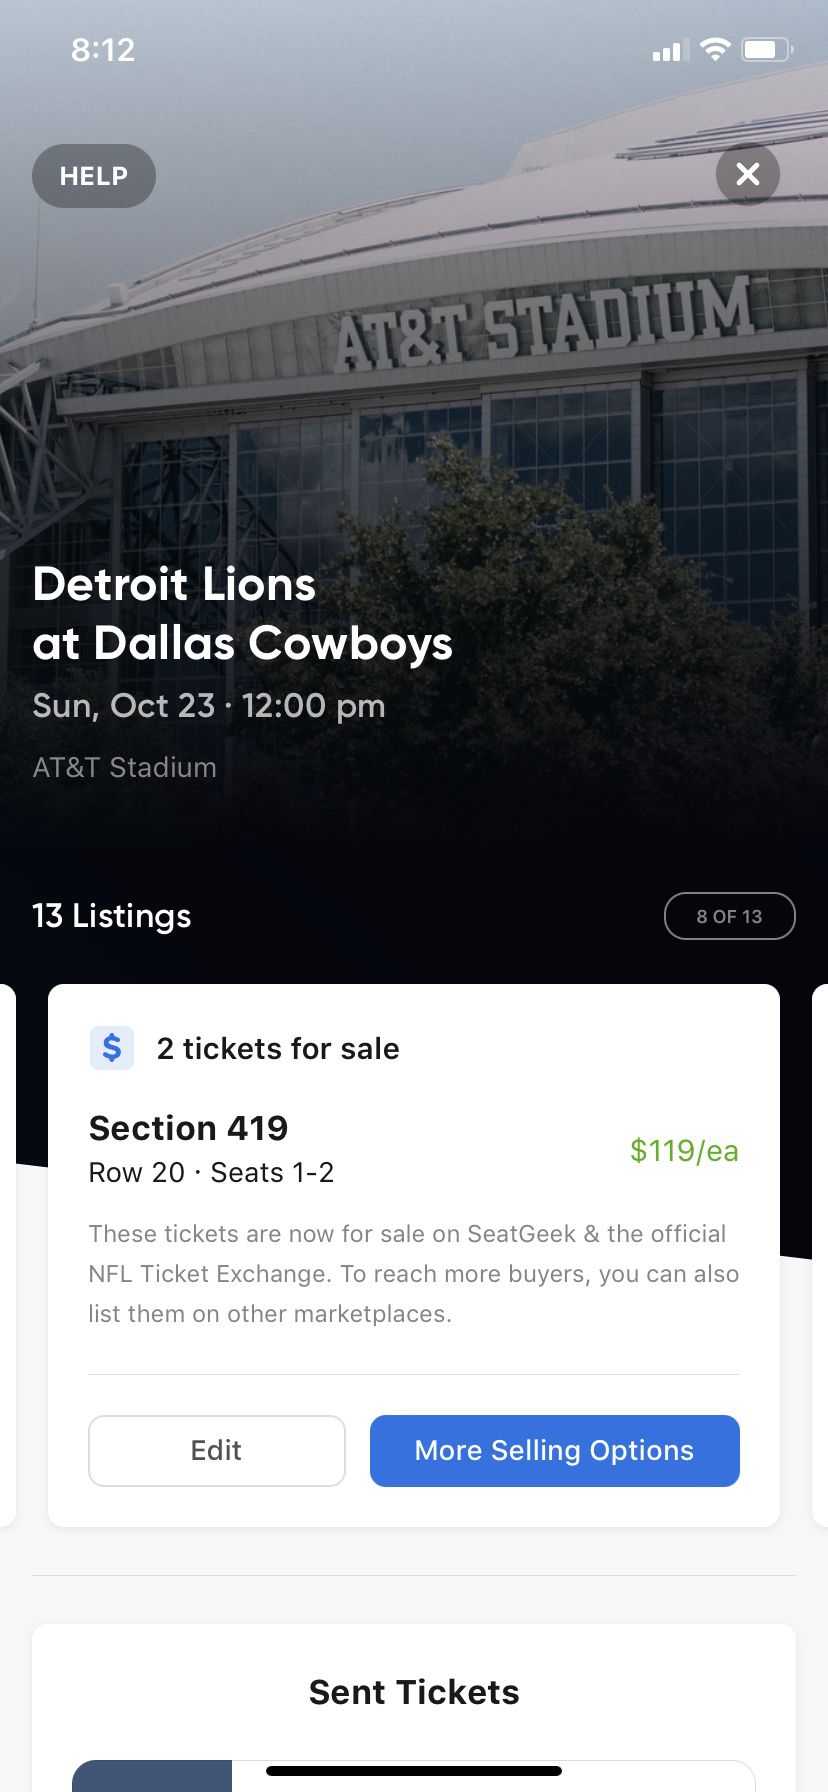 Many Good Options For Detroit Lions @ Dallas Cowboys Tickets & Parking